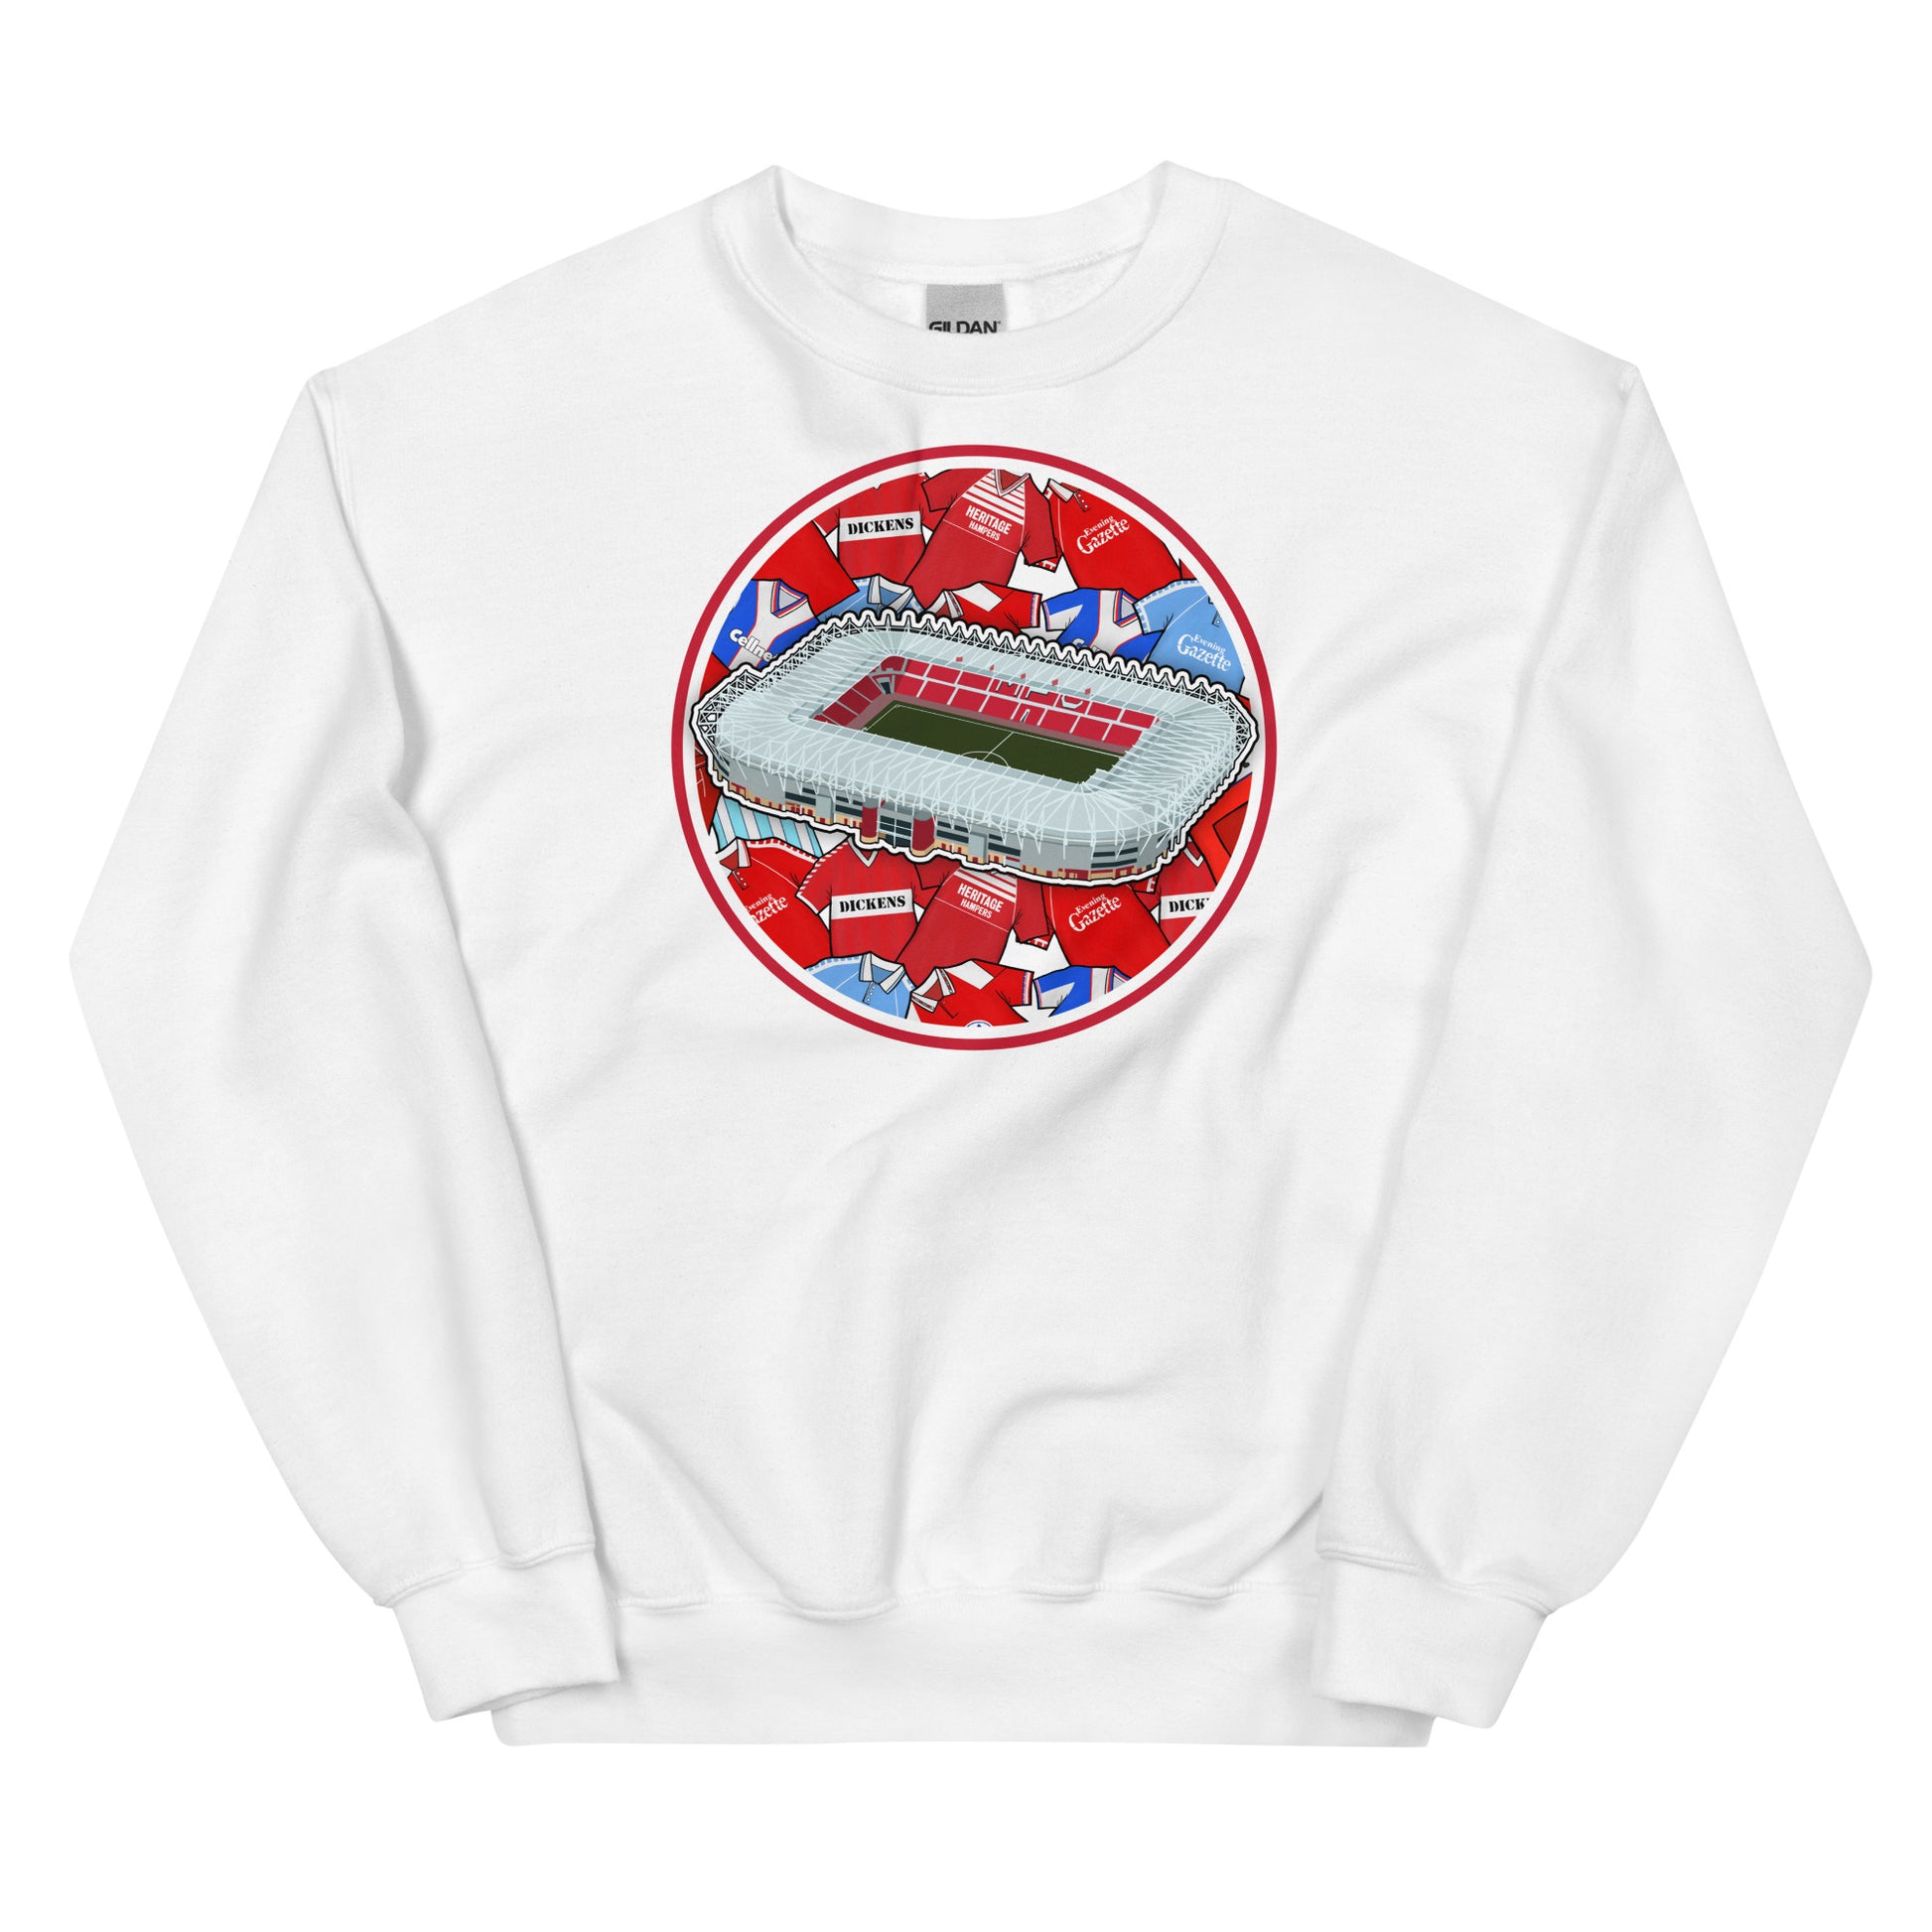 White Retro Sweatshirt Inspired by the home of Middlesbrough Football, The Riverside Stadium in North Yorkshire!